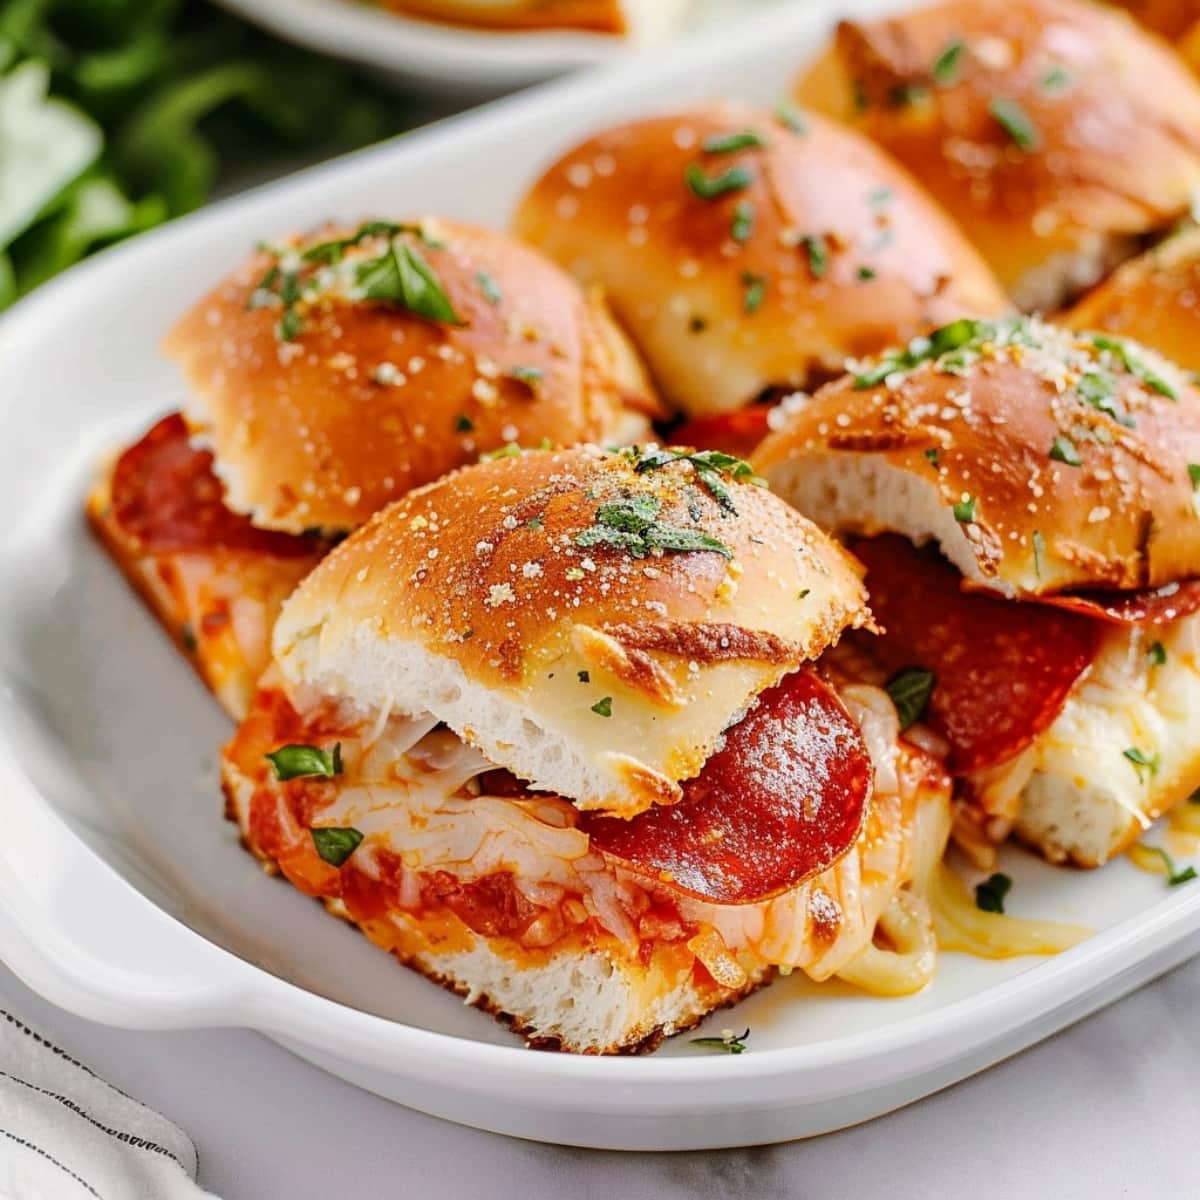 Cheesy pizza sliders with pepperoni, topped with herbs